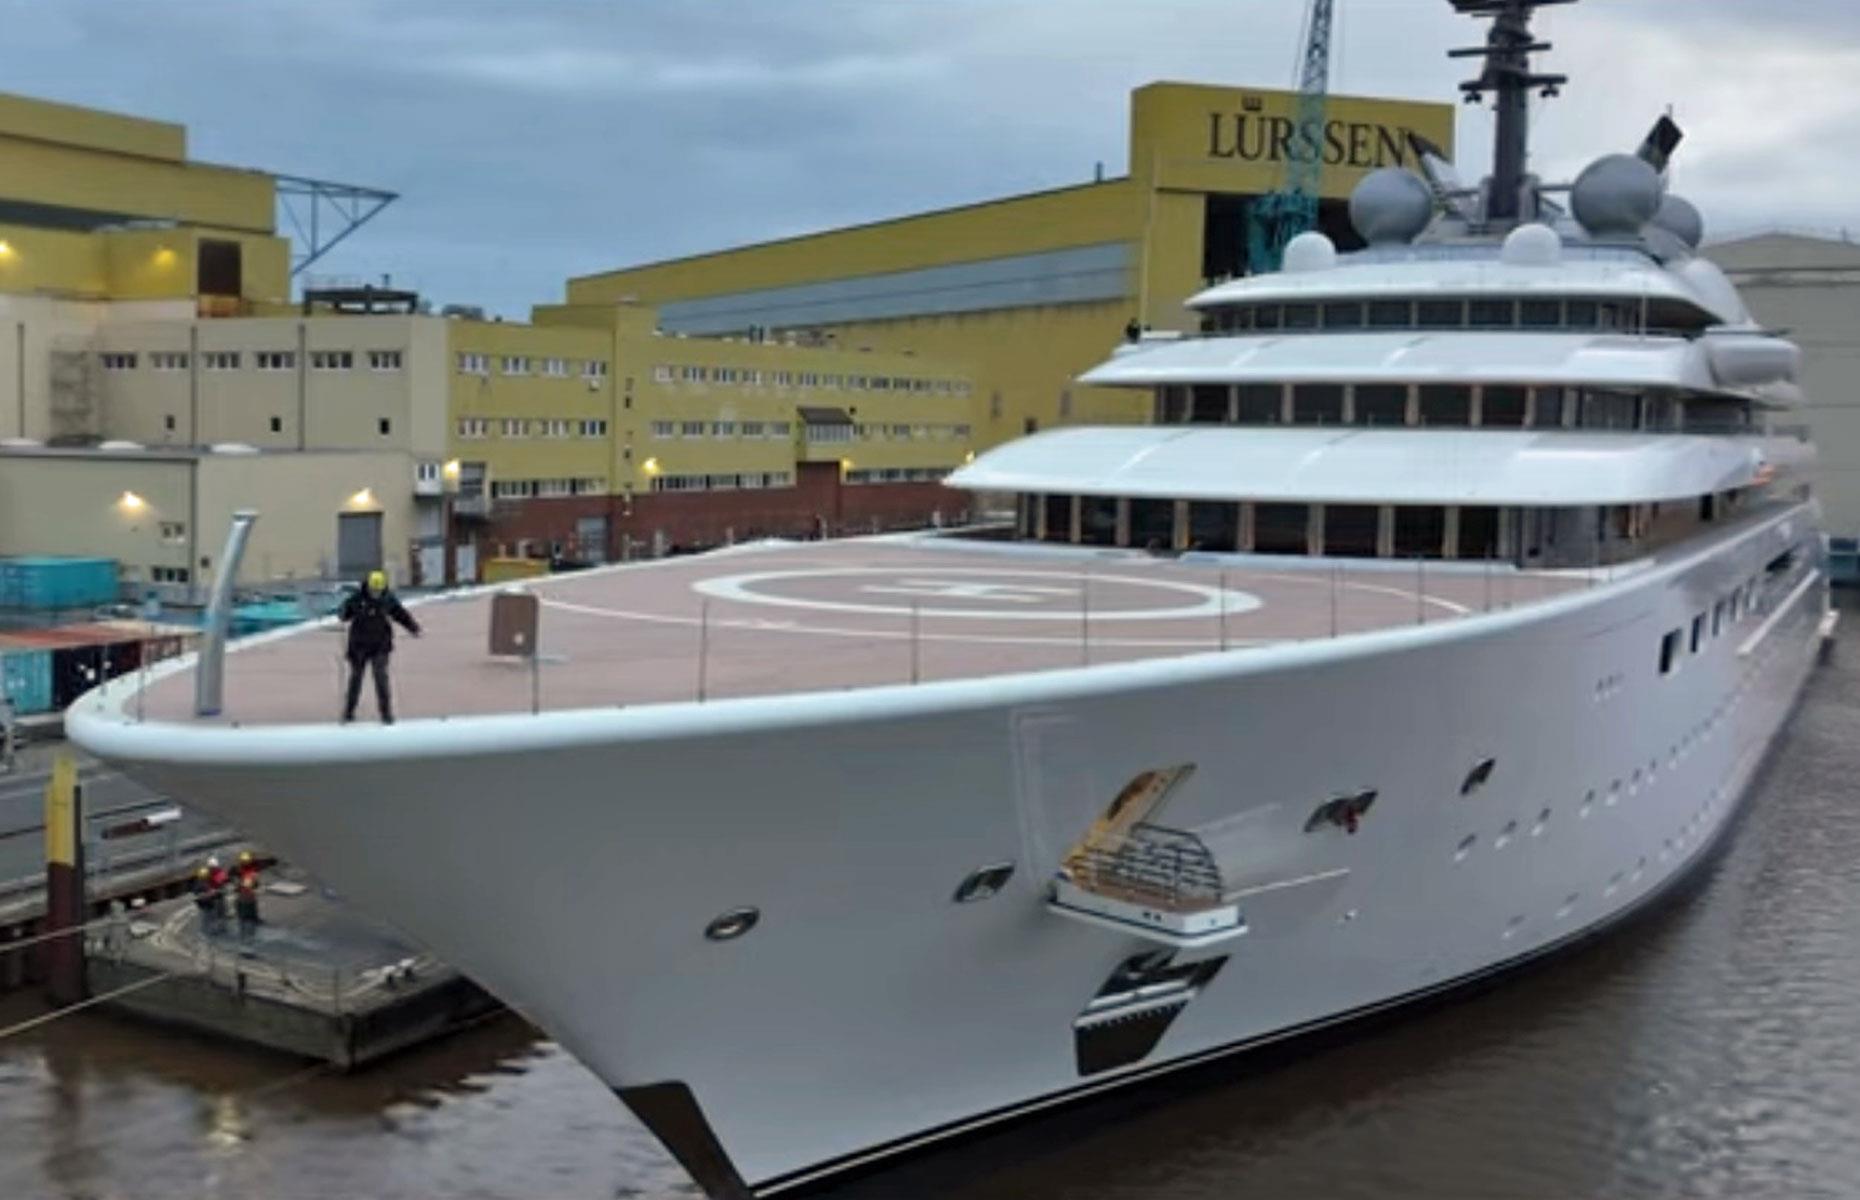 <p>The second-biggest of Lürssen's four superyachts expected to launch this year,<em> Project Deep Blue</em> may not be delivered to its owner until 2025, according to several expert forecasts.</p>  <p>Details about the project are scant. Even the final length of the superyacht is uncertain, but it's believed to measure at least 427 feet (130m).</p>